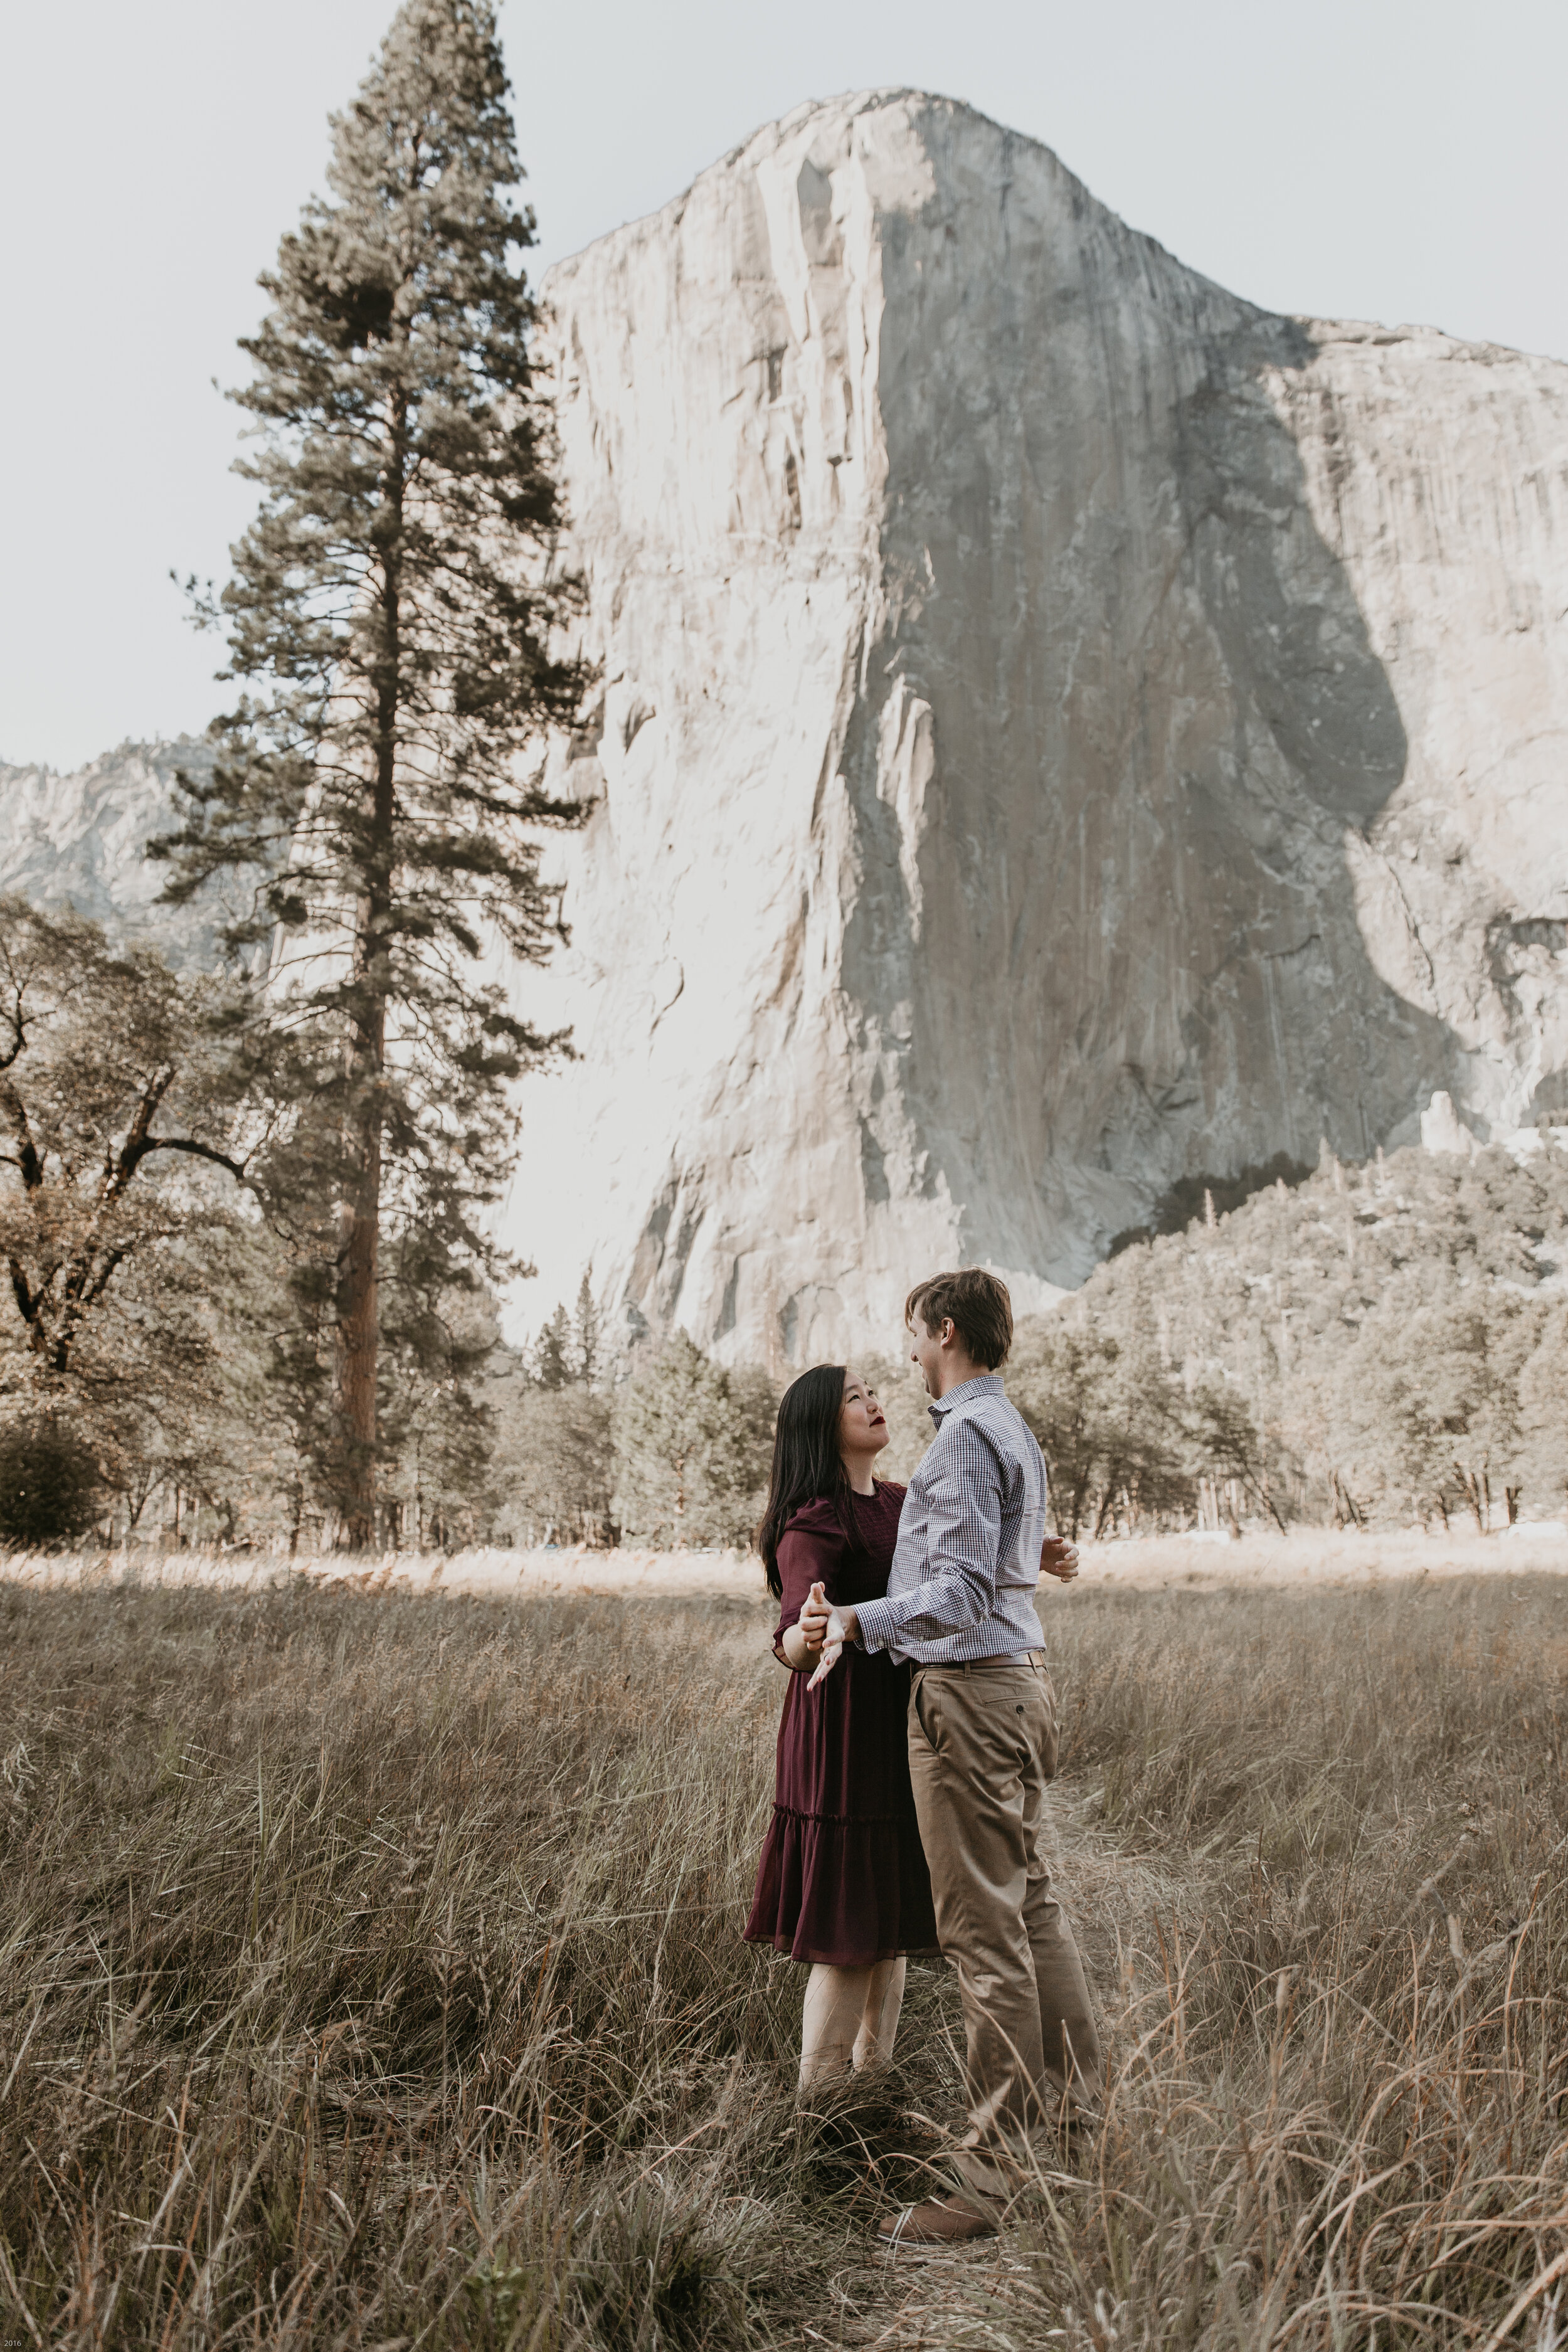 yosemite-national-park-couples-session-at-taft-point-and-yosemite-valley-yosemite-elopement-photographer-nicole-daacke-photography-102.jpg